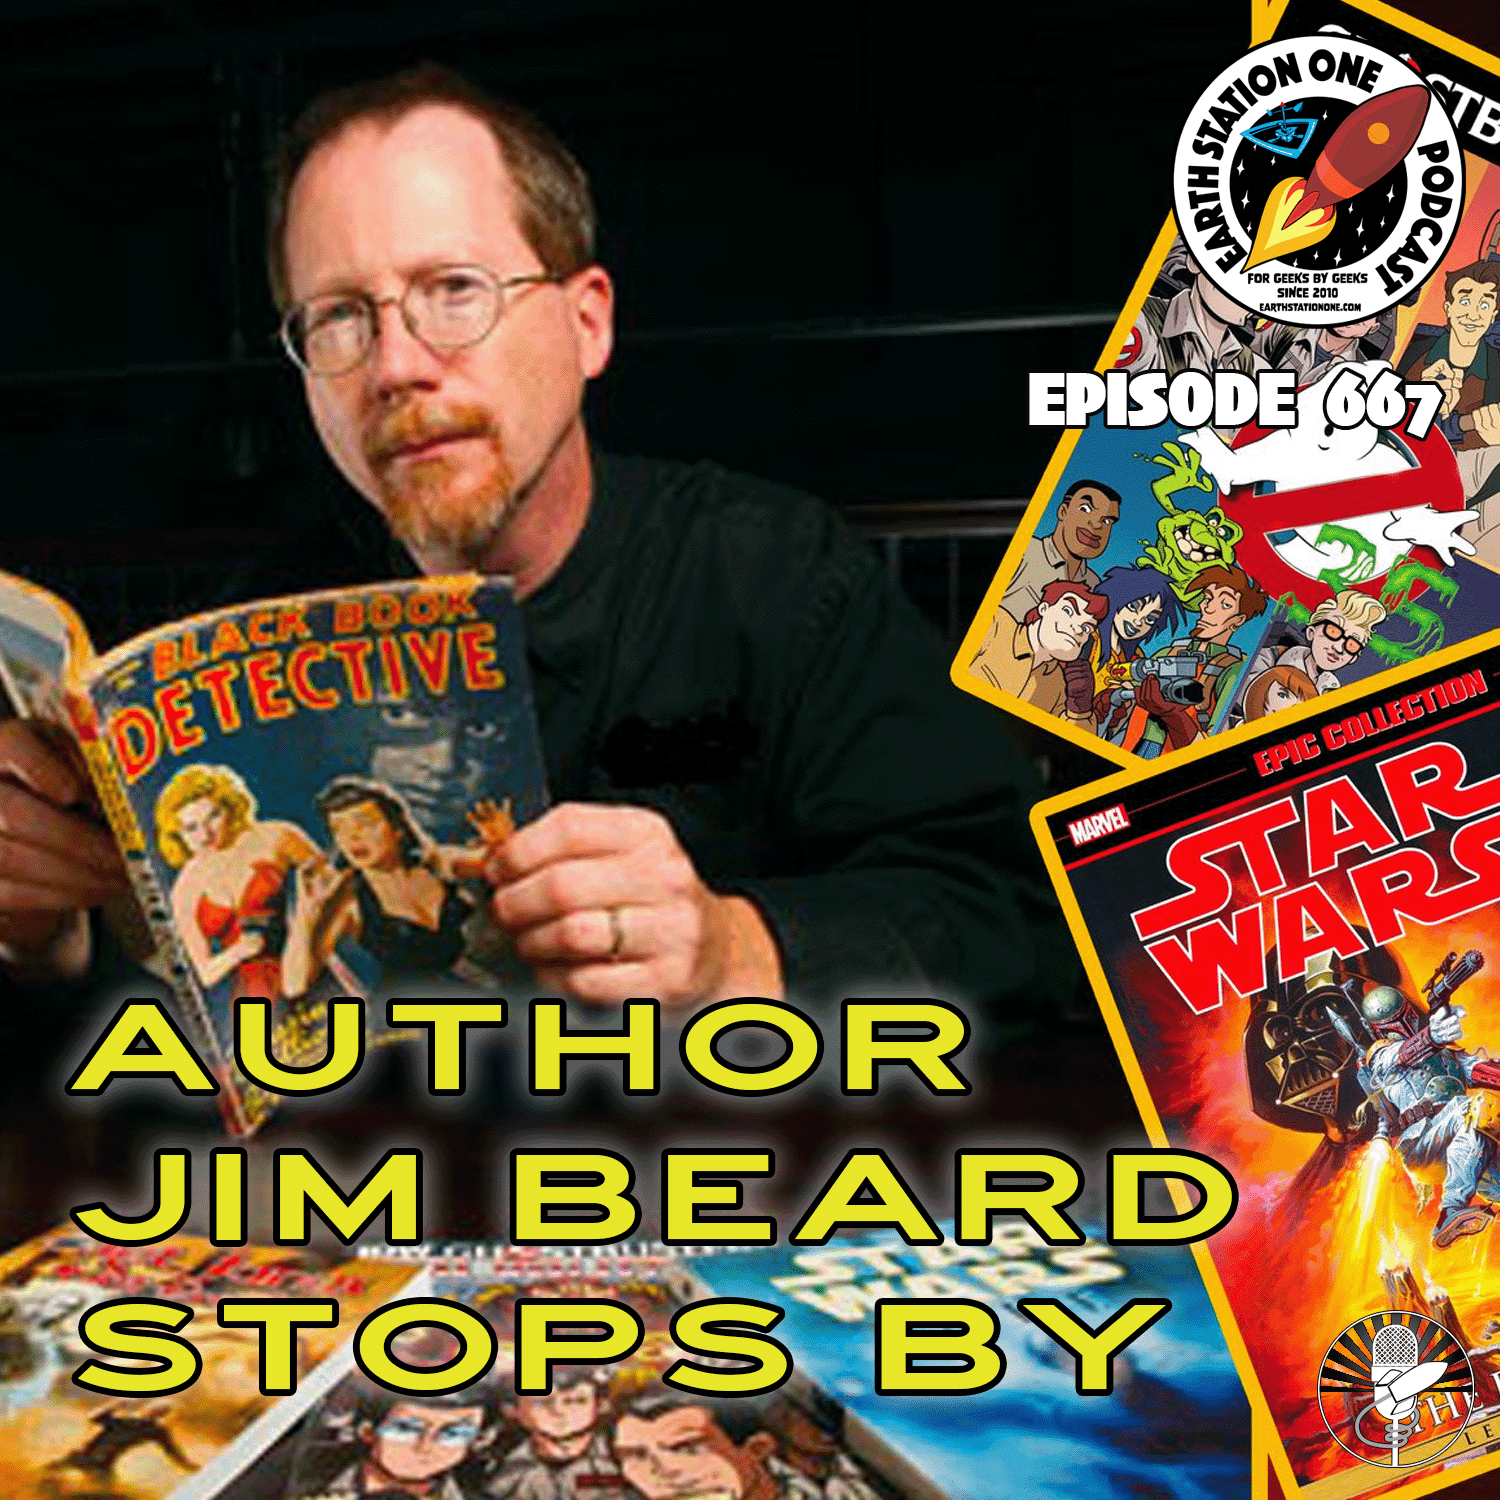 Earth Station One Ep 667 - Author Jim Beard Stops By